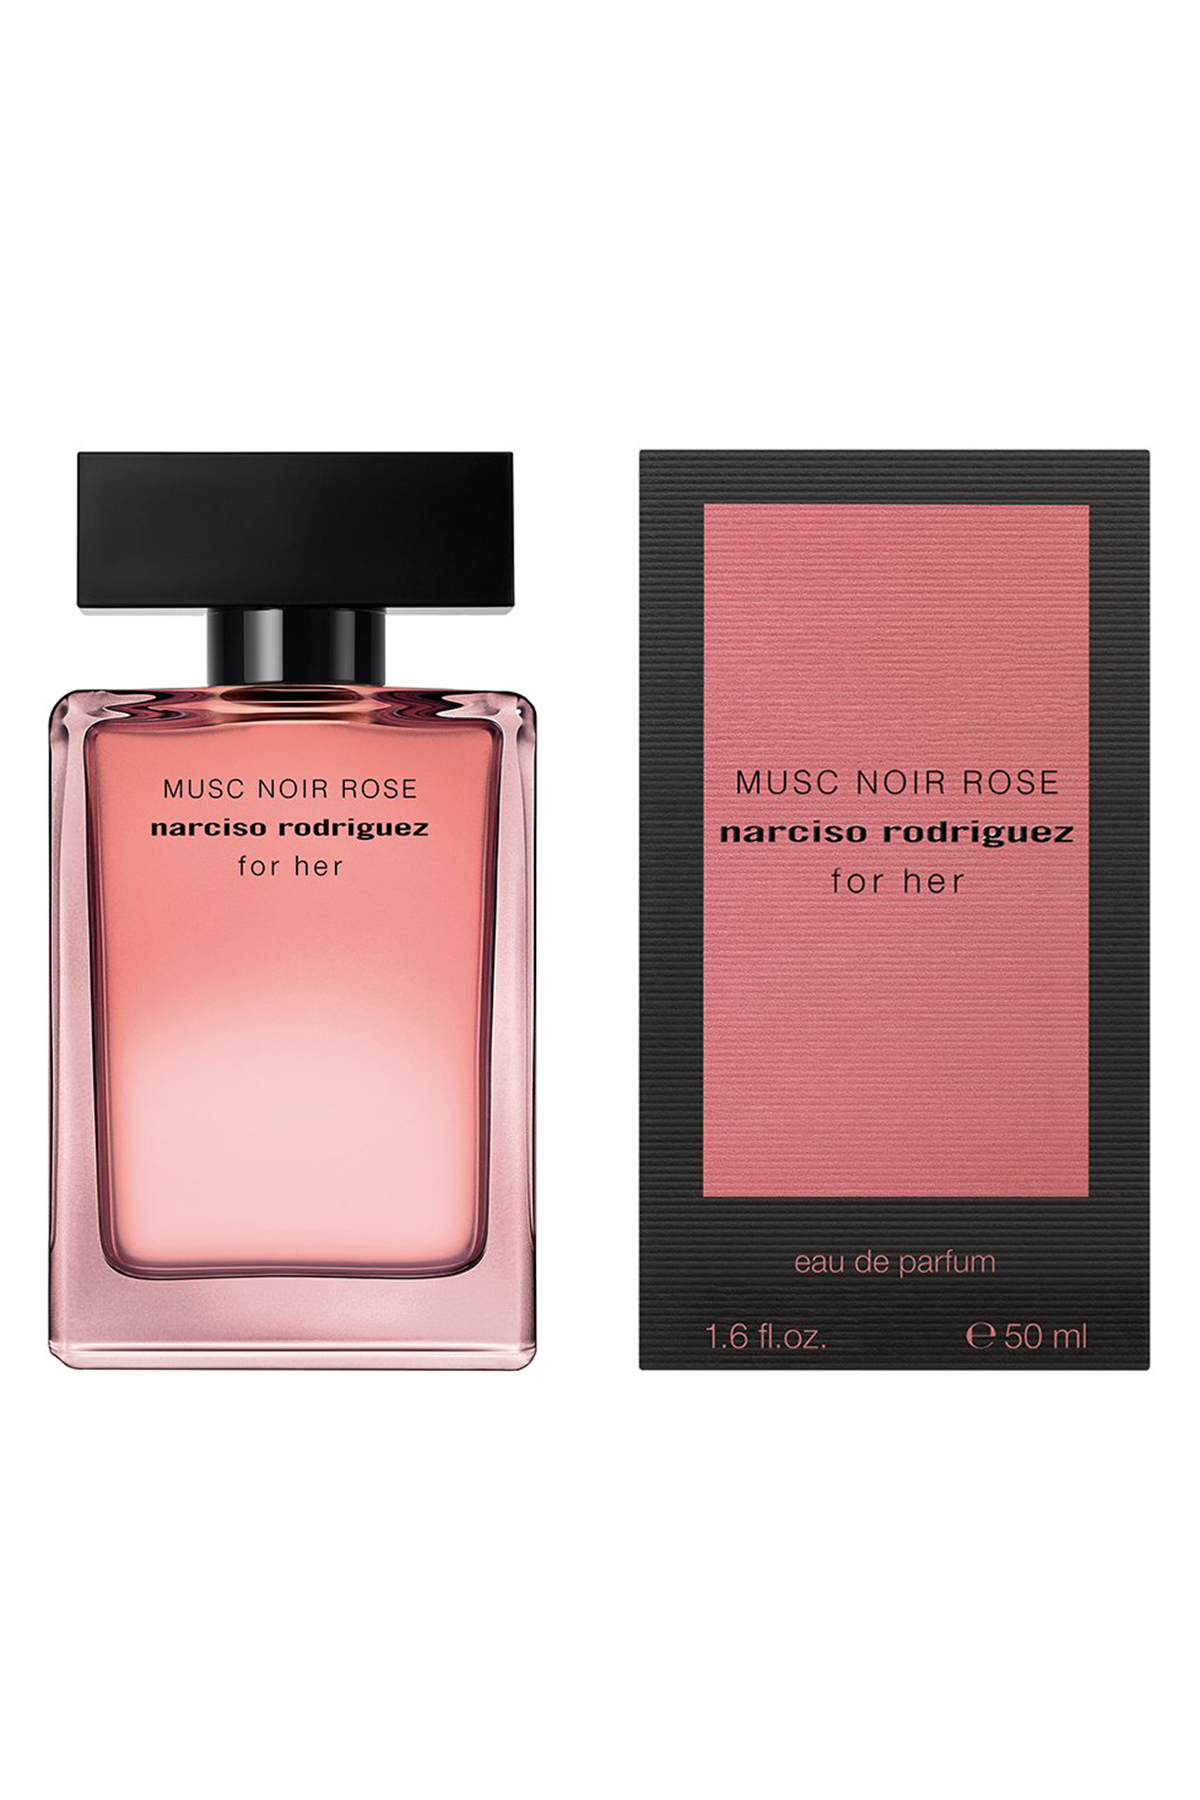 Narciso rodriguez musc noir rose for her. Narciso Rodriguez Musc Noir Rose. Narciso Rodriguez for her Eau de Parfum. Narciso Rodriguez for her роллер. Narciso Rodriguez Musc Noir Rose for her парфюмерная вода 100 мл.